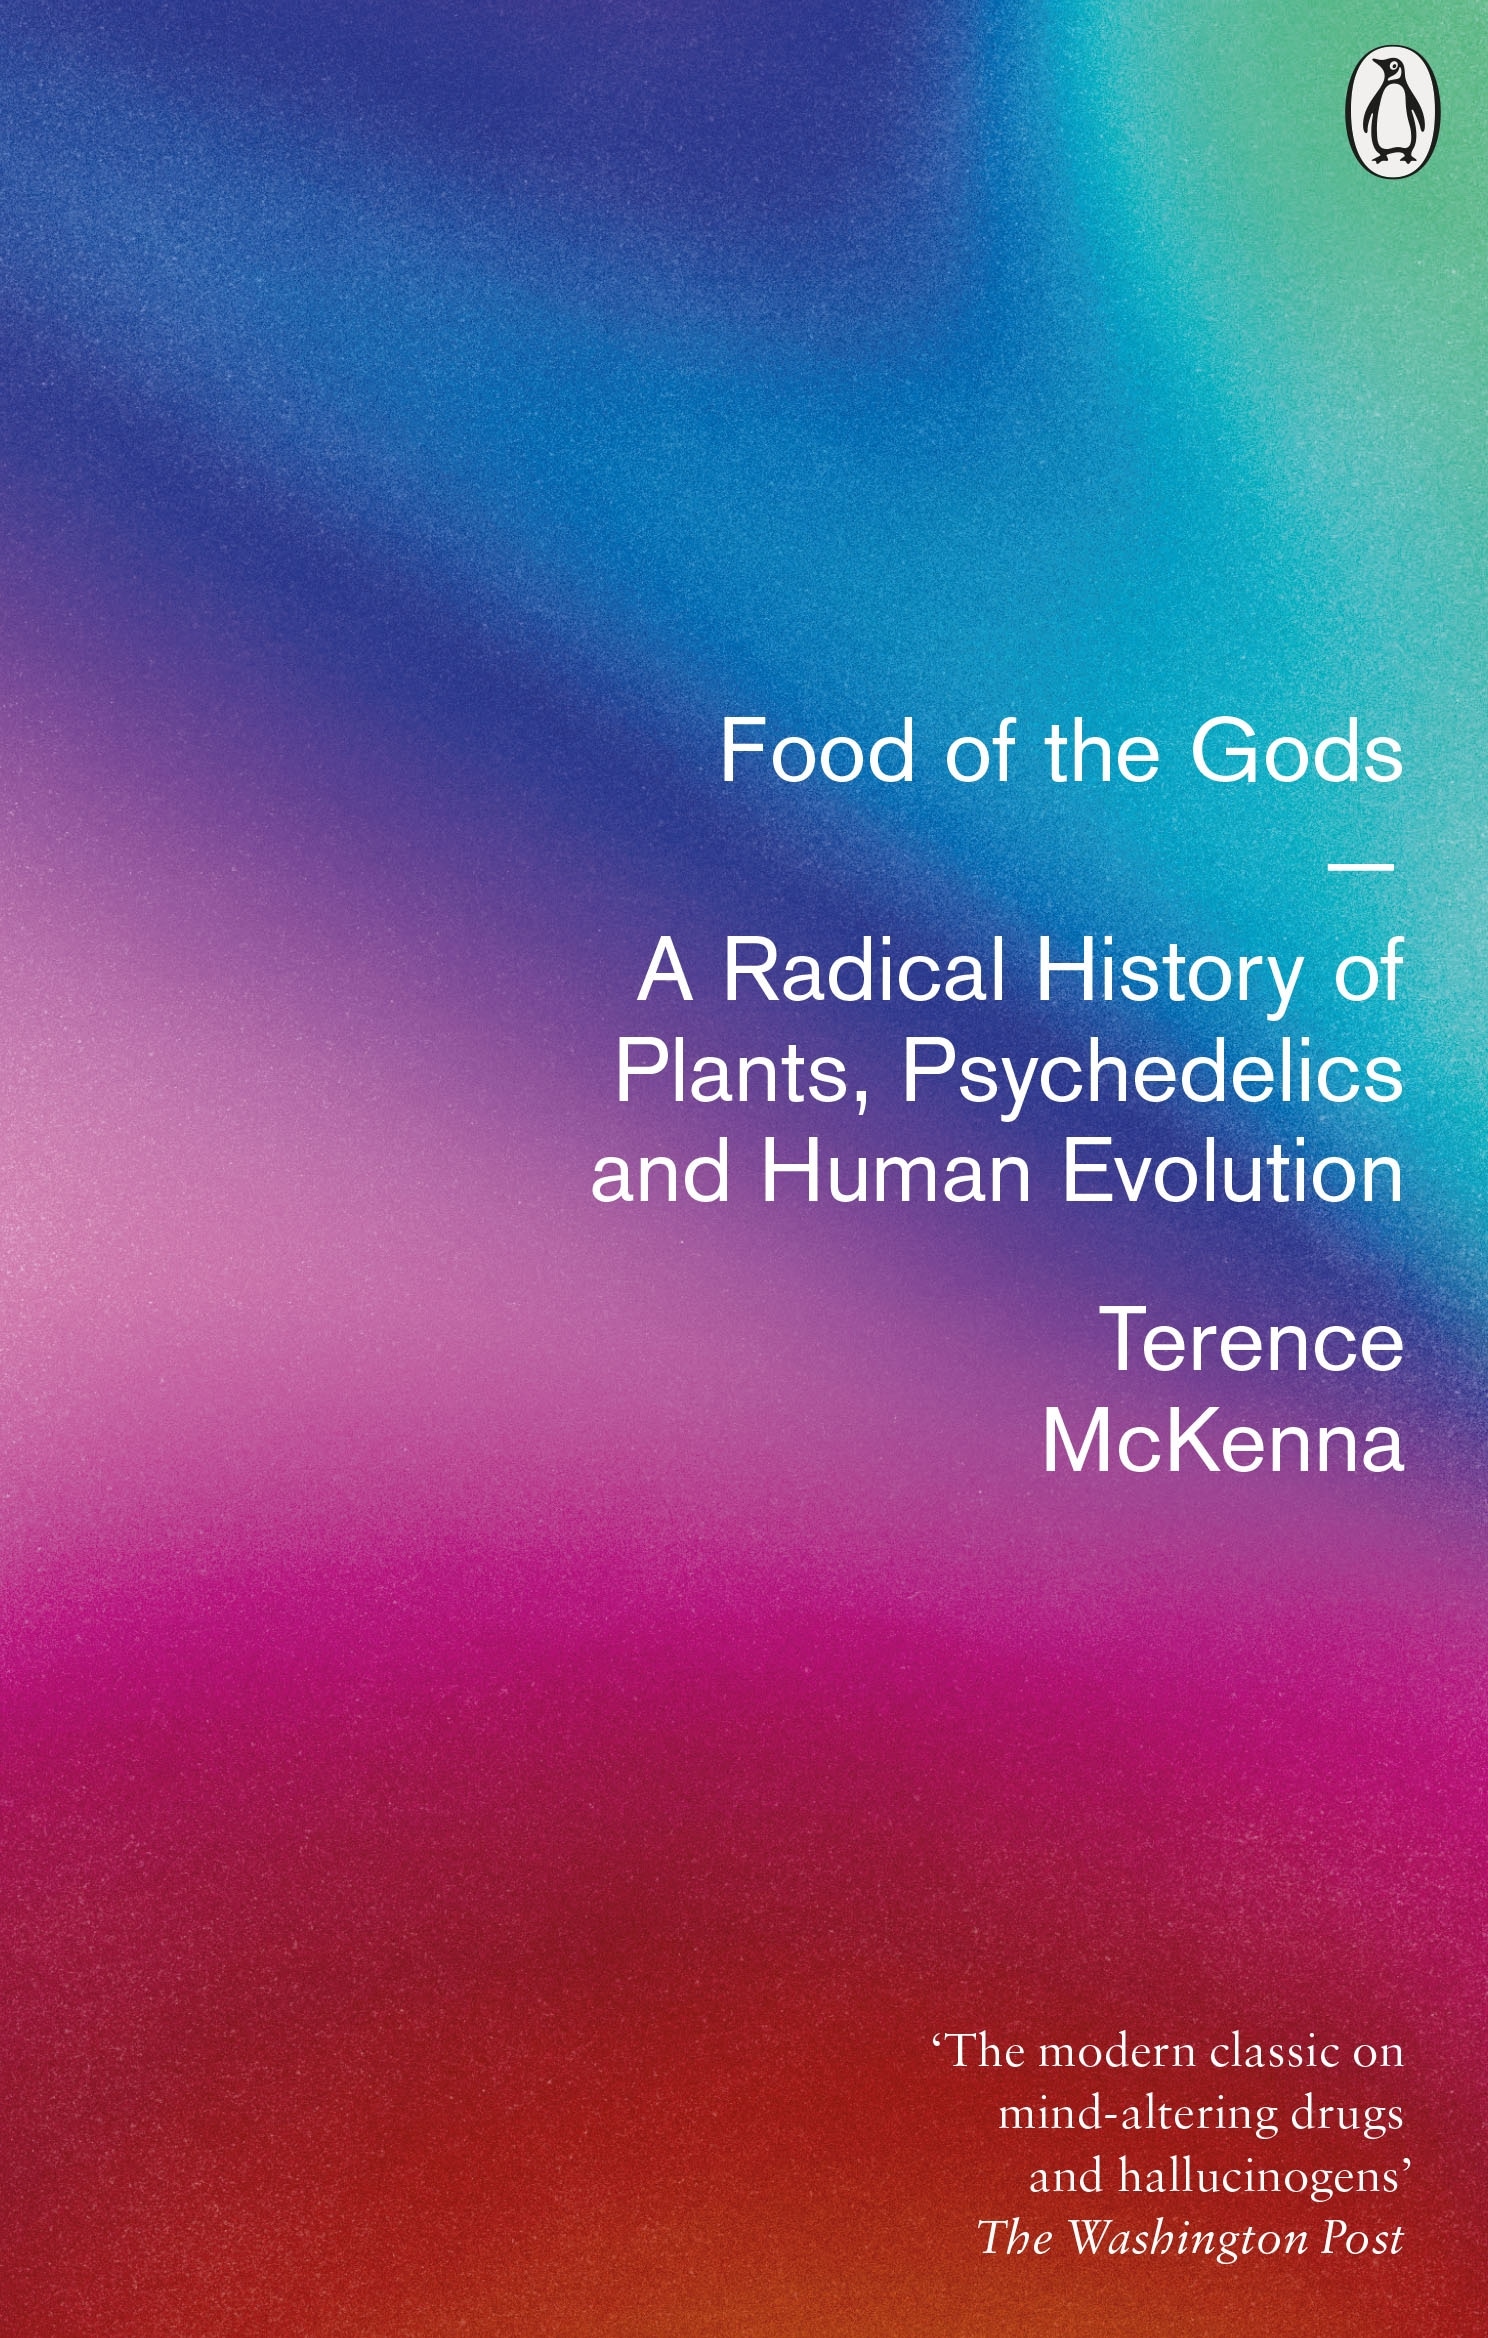 Book “Food Of The Gods” by Terence McKenna — May 6, 1999